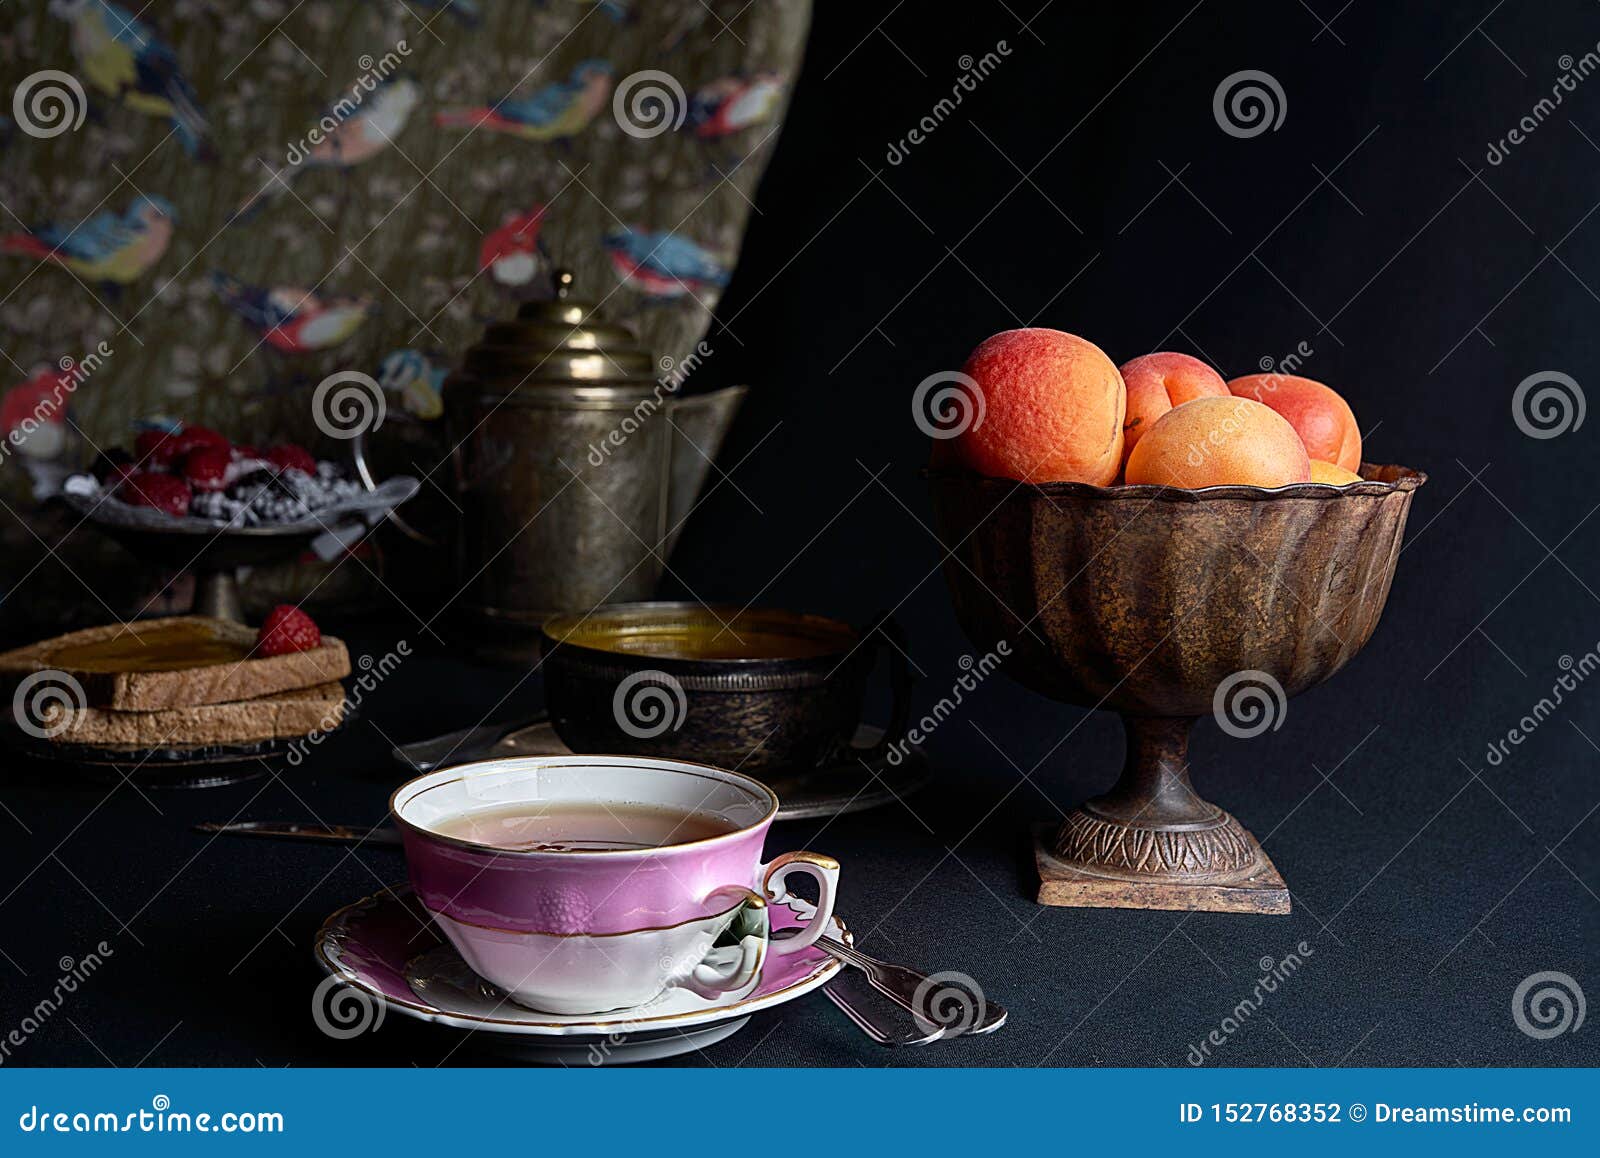 a cup of tea accompanied by fresh apricots, apricot jam and a tray of berries